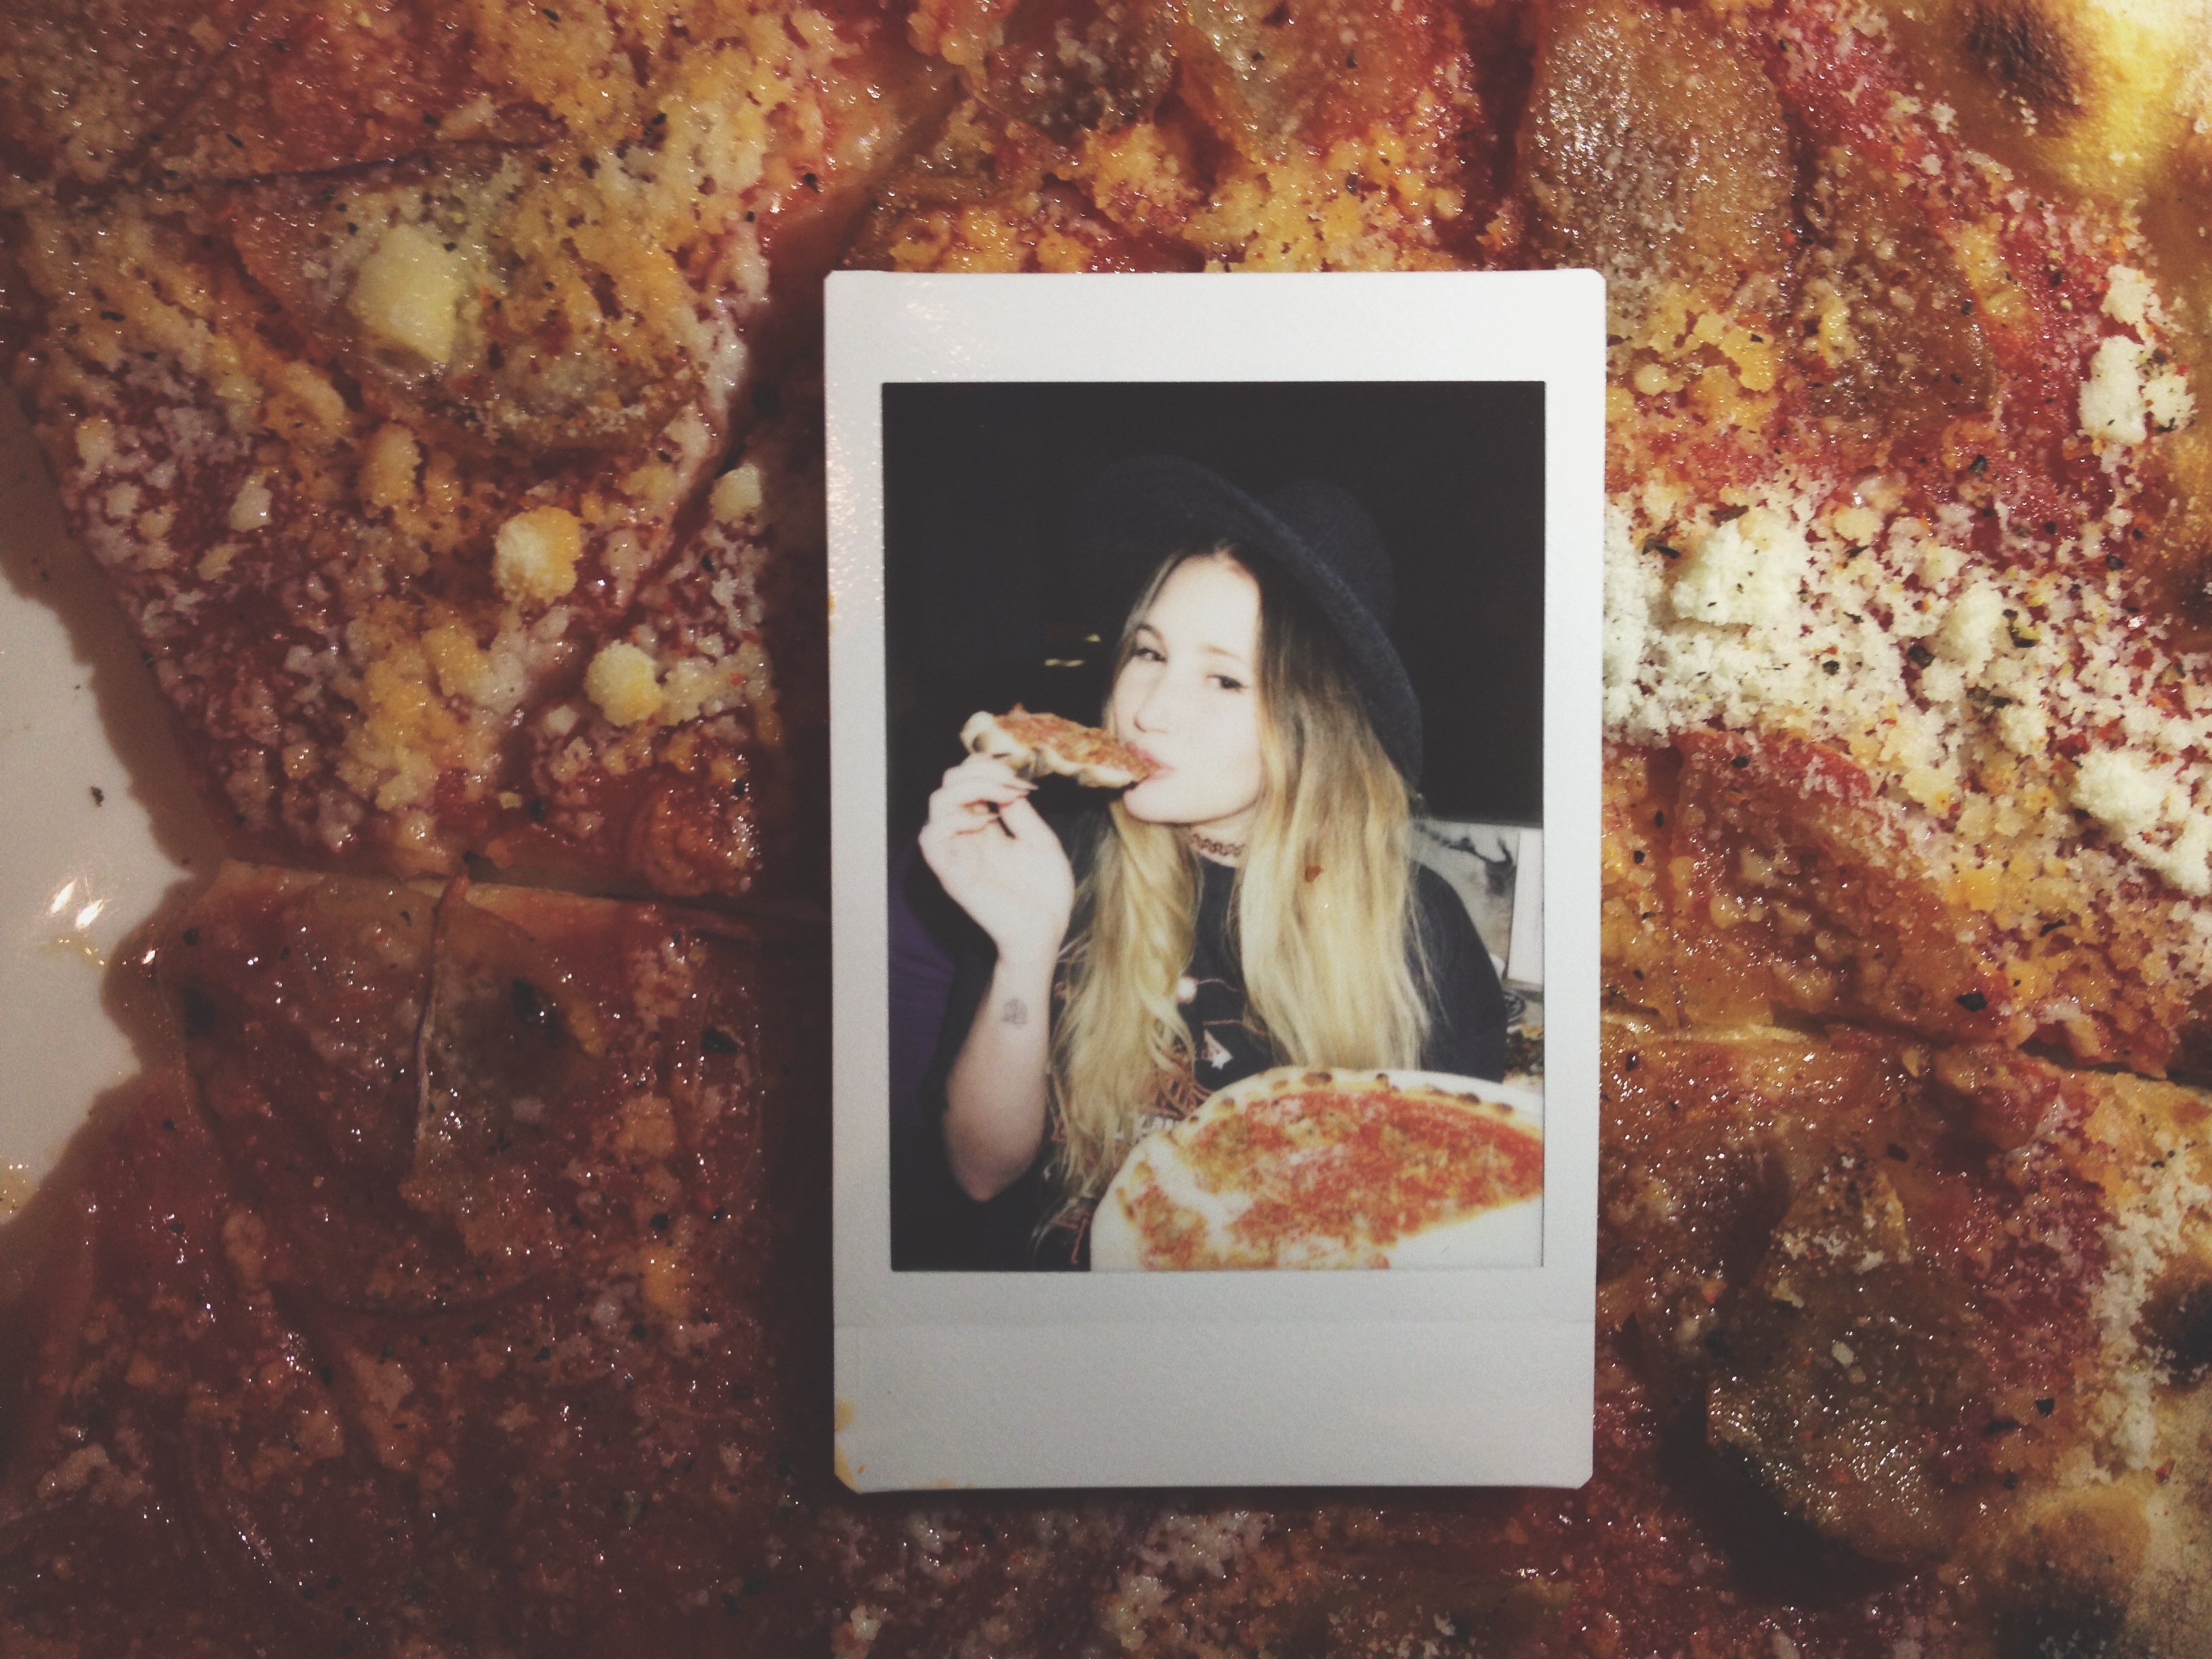 Hot Girls Eating Pizza Tell Us Whether They Prefer Sex Or A Slice